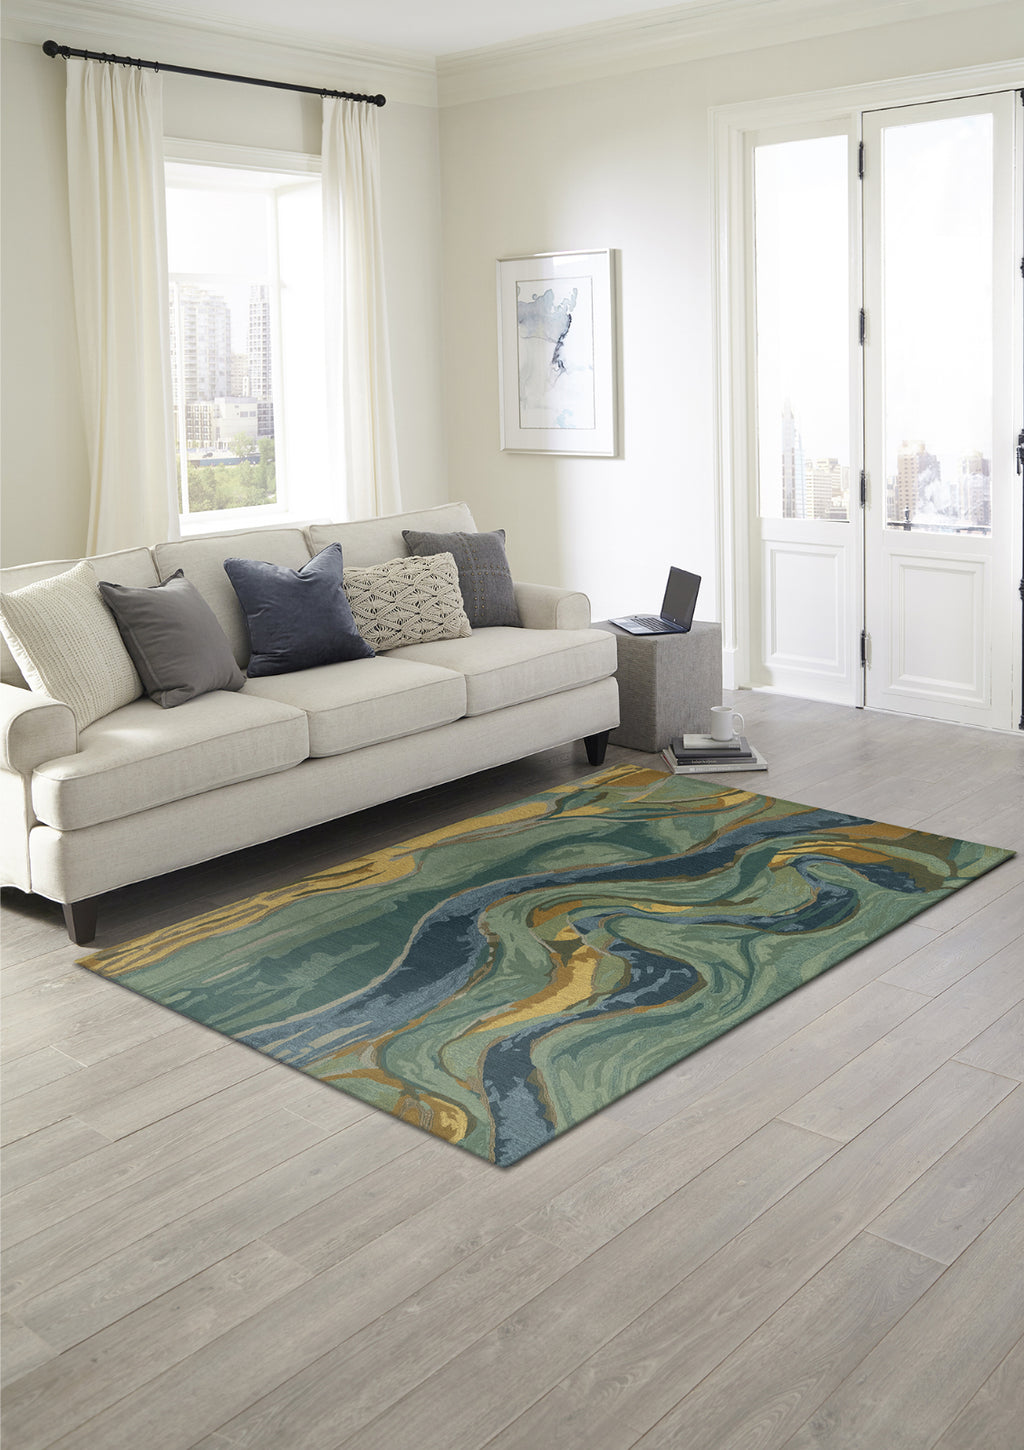 Trans Ocean Corsica 9149/03 Panorama Blue Area Rug by Liora Manne Room Scene Image Feature